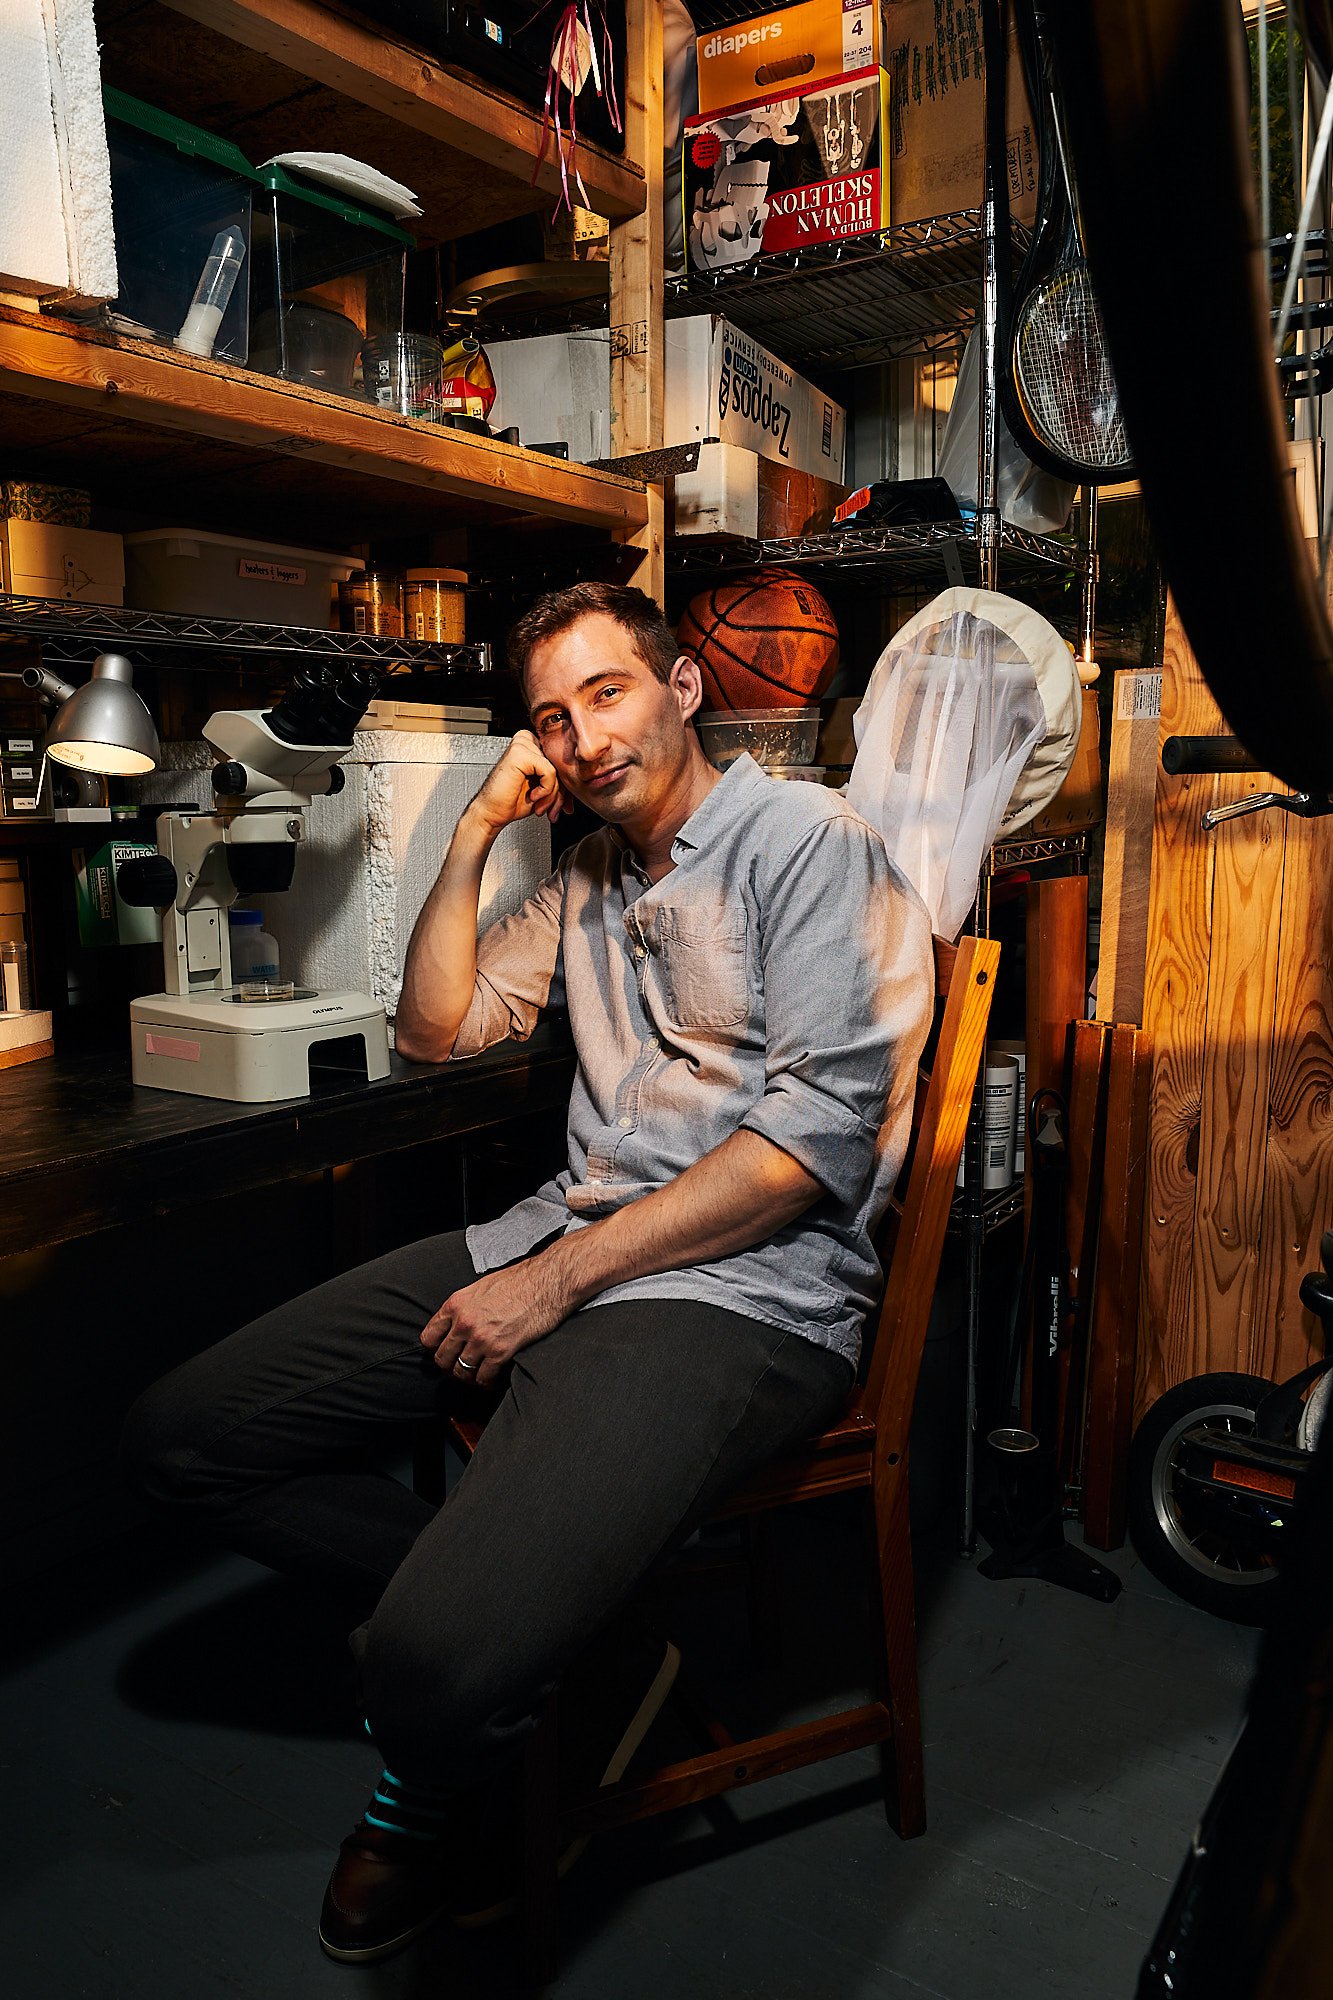  Dr. Seth Donoughe, postdoctoral fellow studying cricket embryonics at the University of Chicago, in his home lab in Chicago, I.L. on July 29, 2022.   (Mustafa Hussain for The New York Times)  